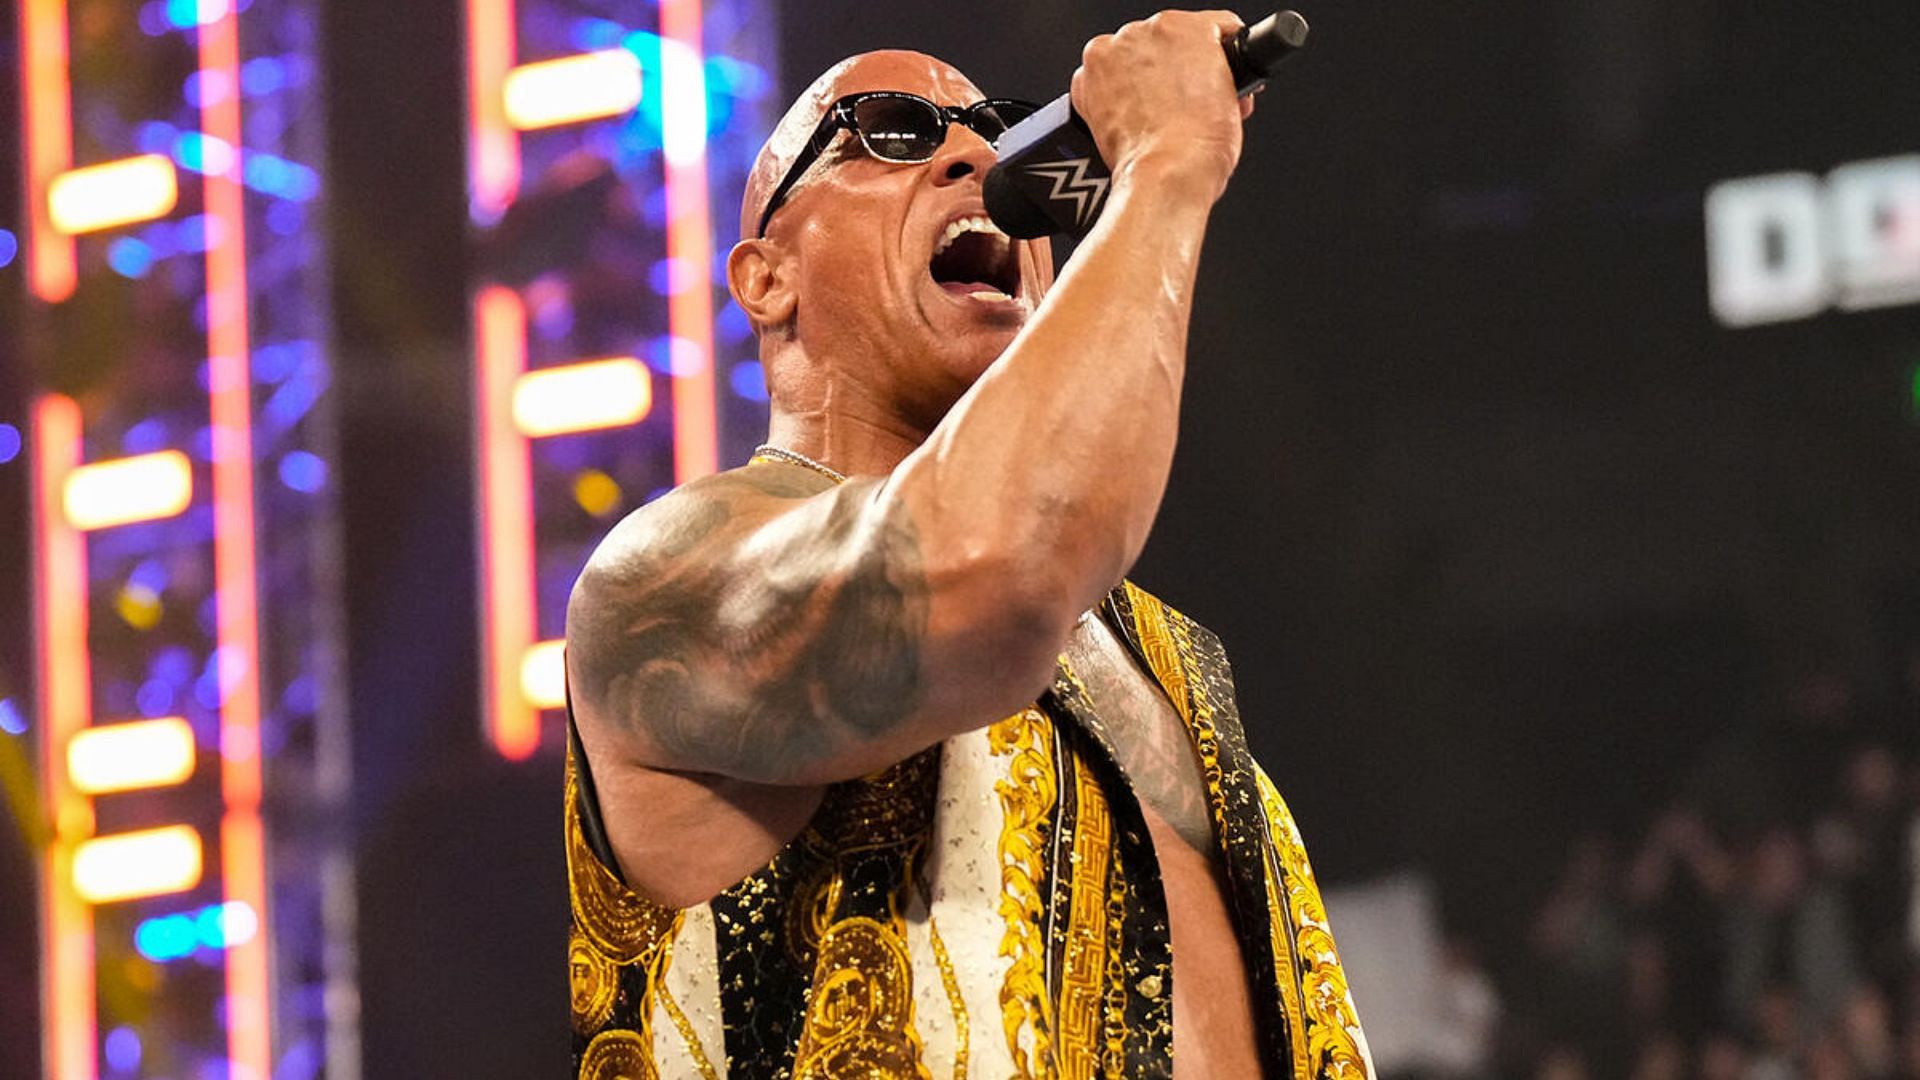 The Rock has cut some questionable promos since his return